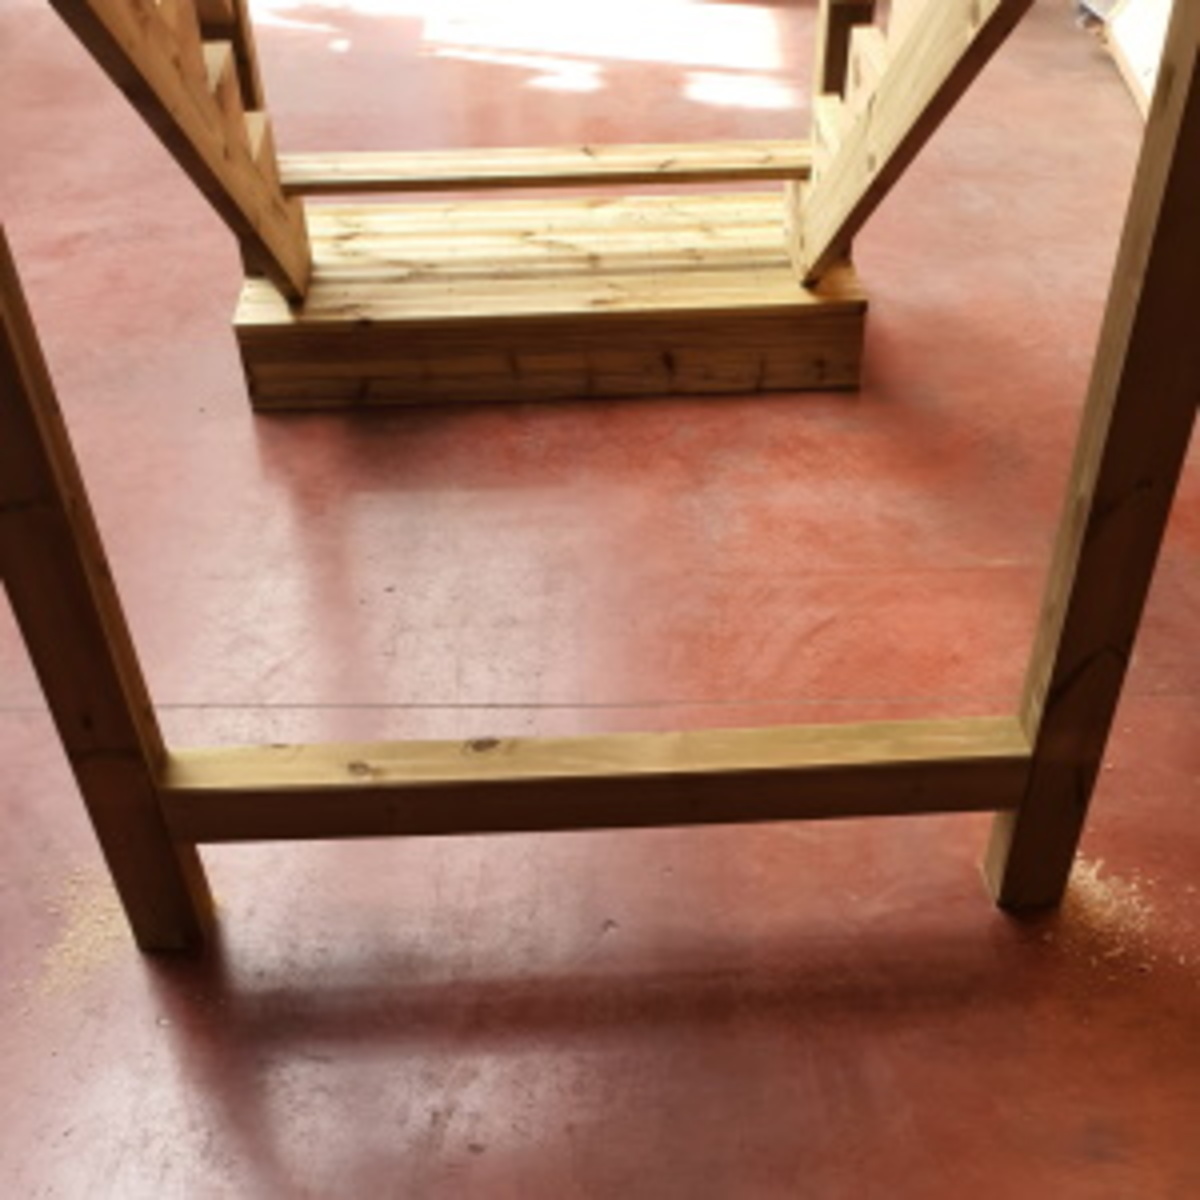 Horizontal stability support post for deck stair with handrailing